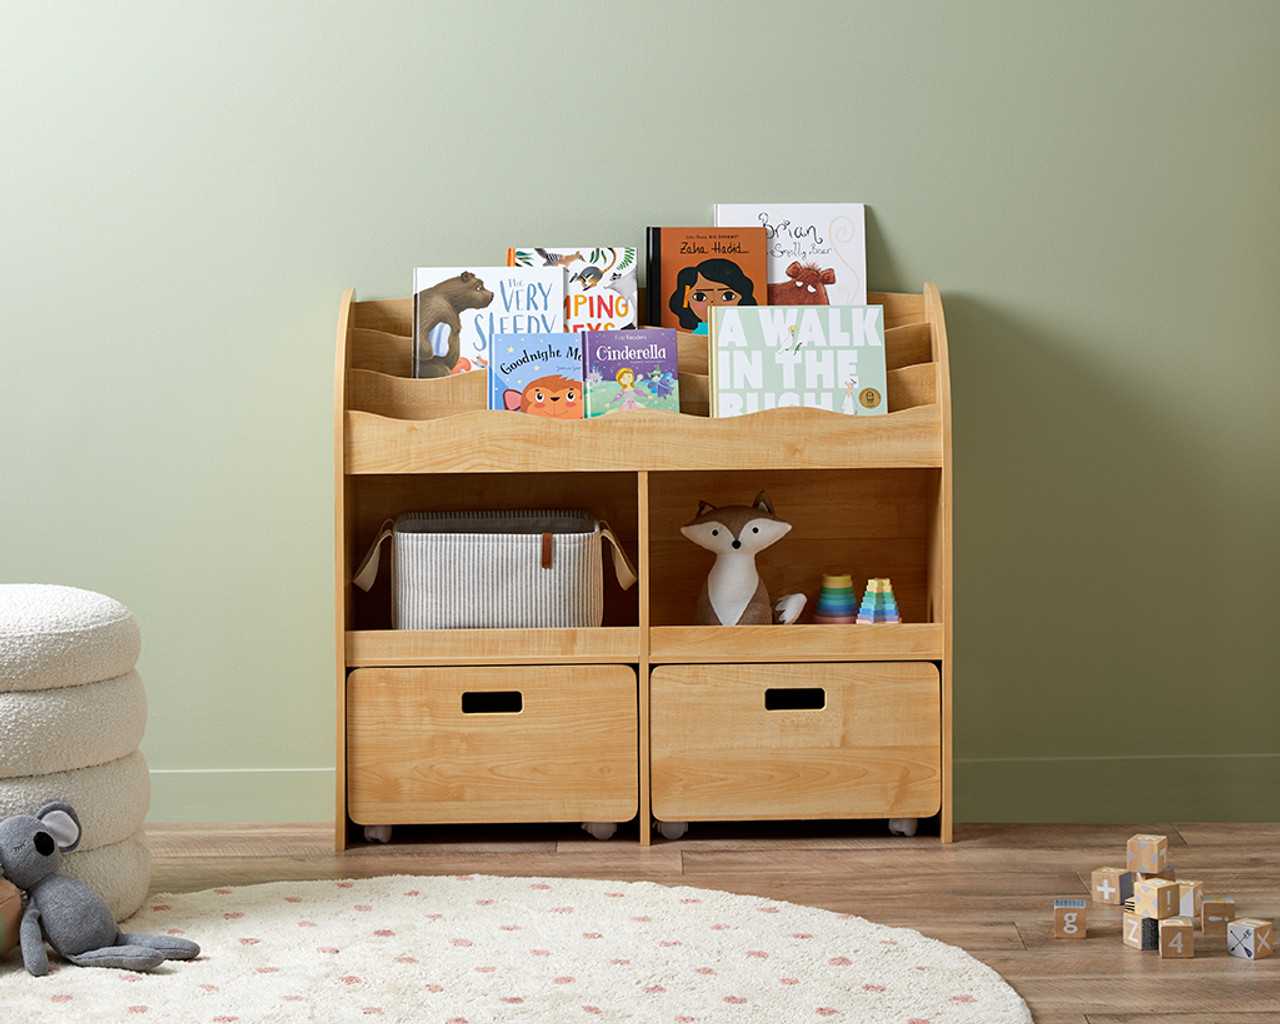 My Favourite Toy Storage For Kids - The Blush Home Blog